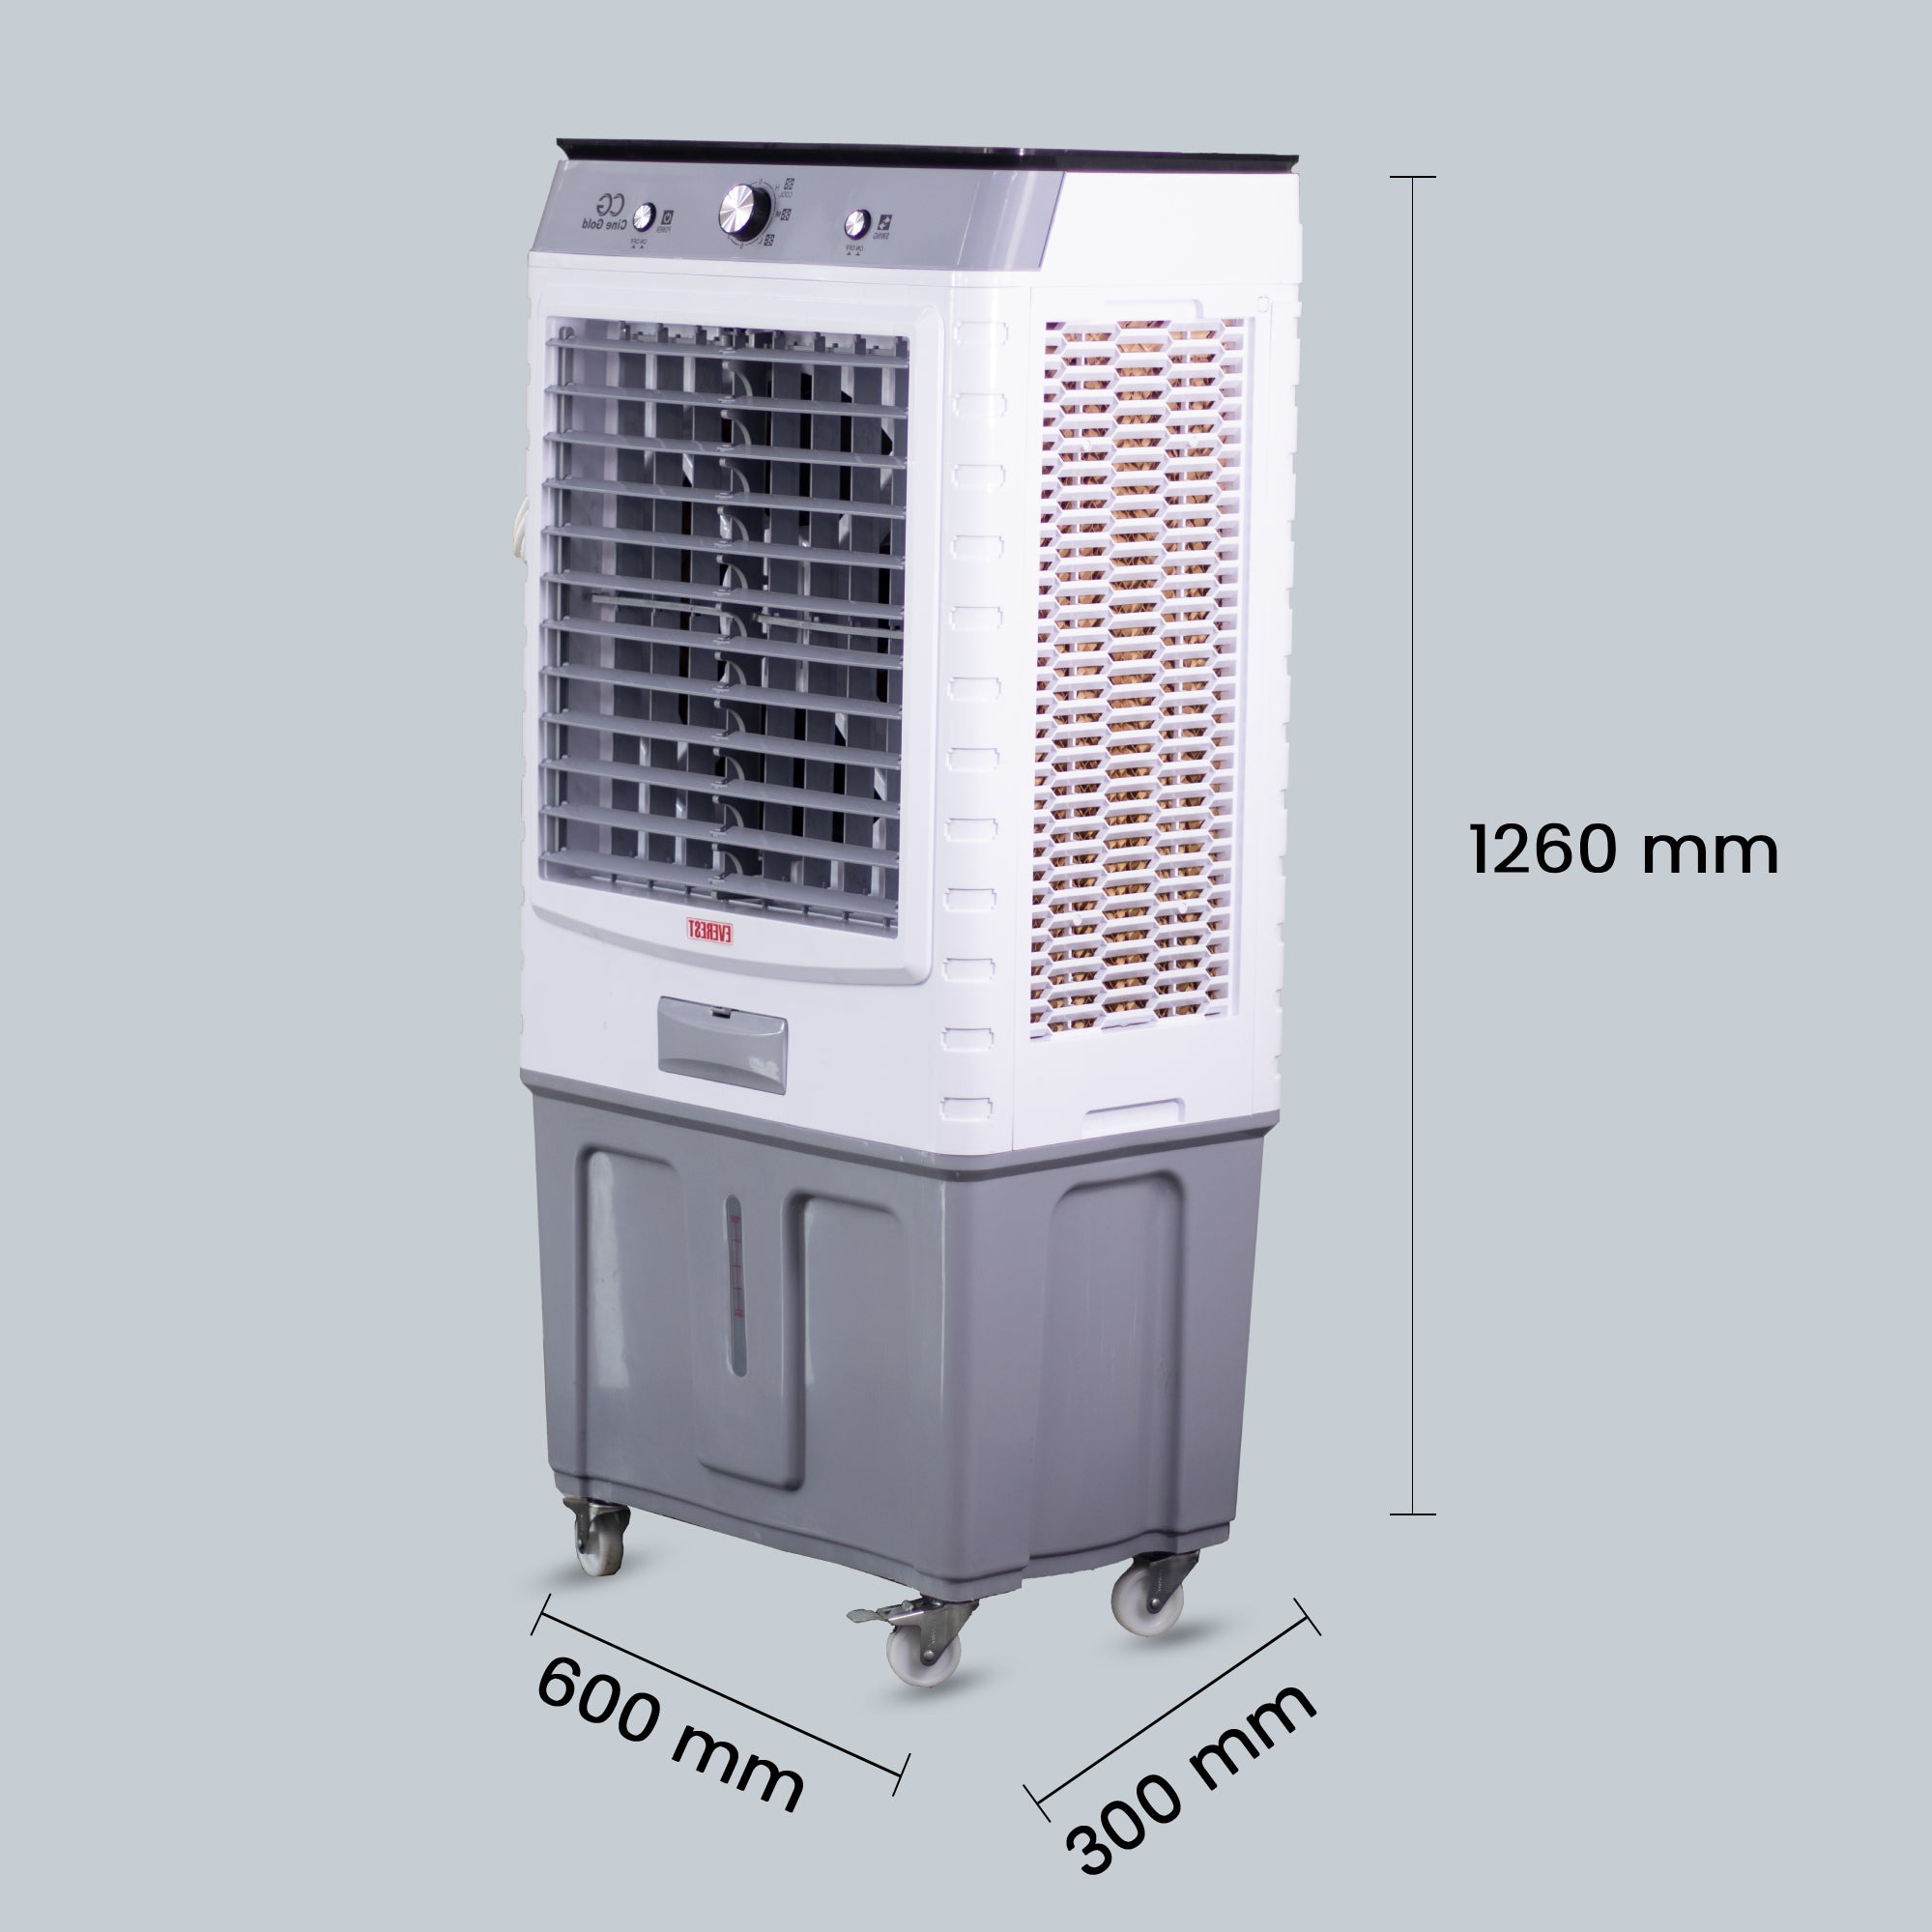 Cine Gold Everest 90 LTRS  Heavy Duty Tower Air Cooler For Home/Office With Honeycomb Cooling & Auto Swing Technology, Powerful Air Throw & 3-Speed Control With Ice Toughened Glass Top Chamber White & Light Grey